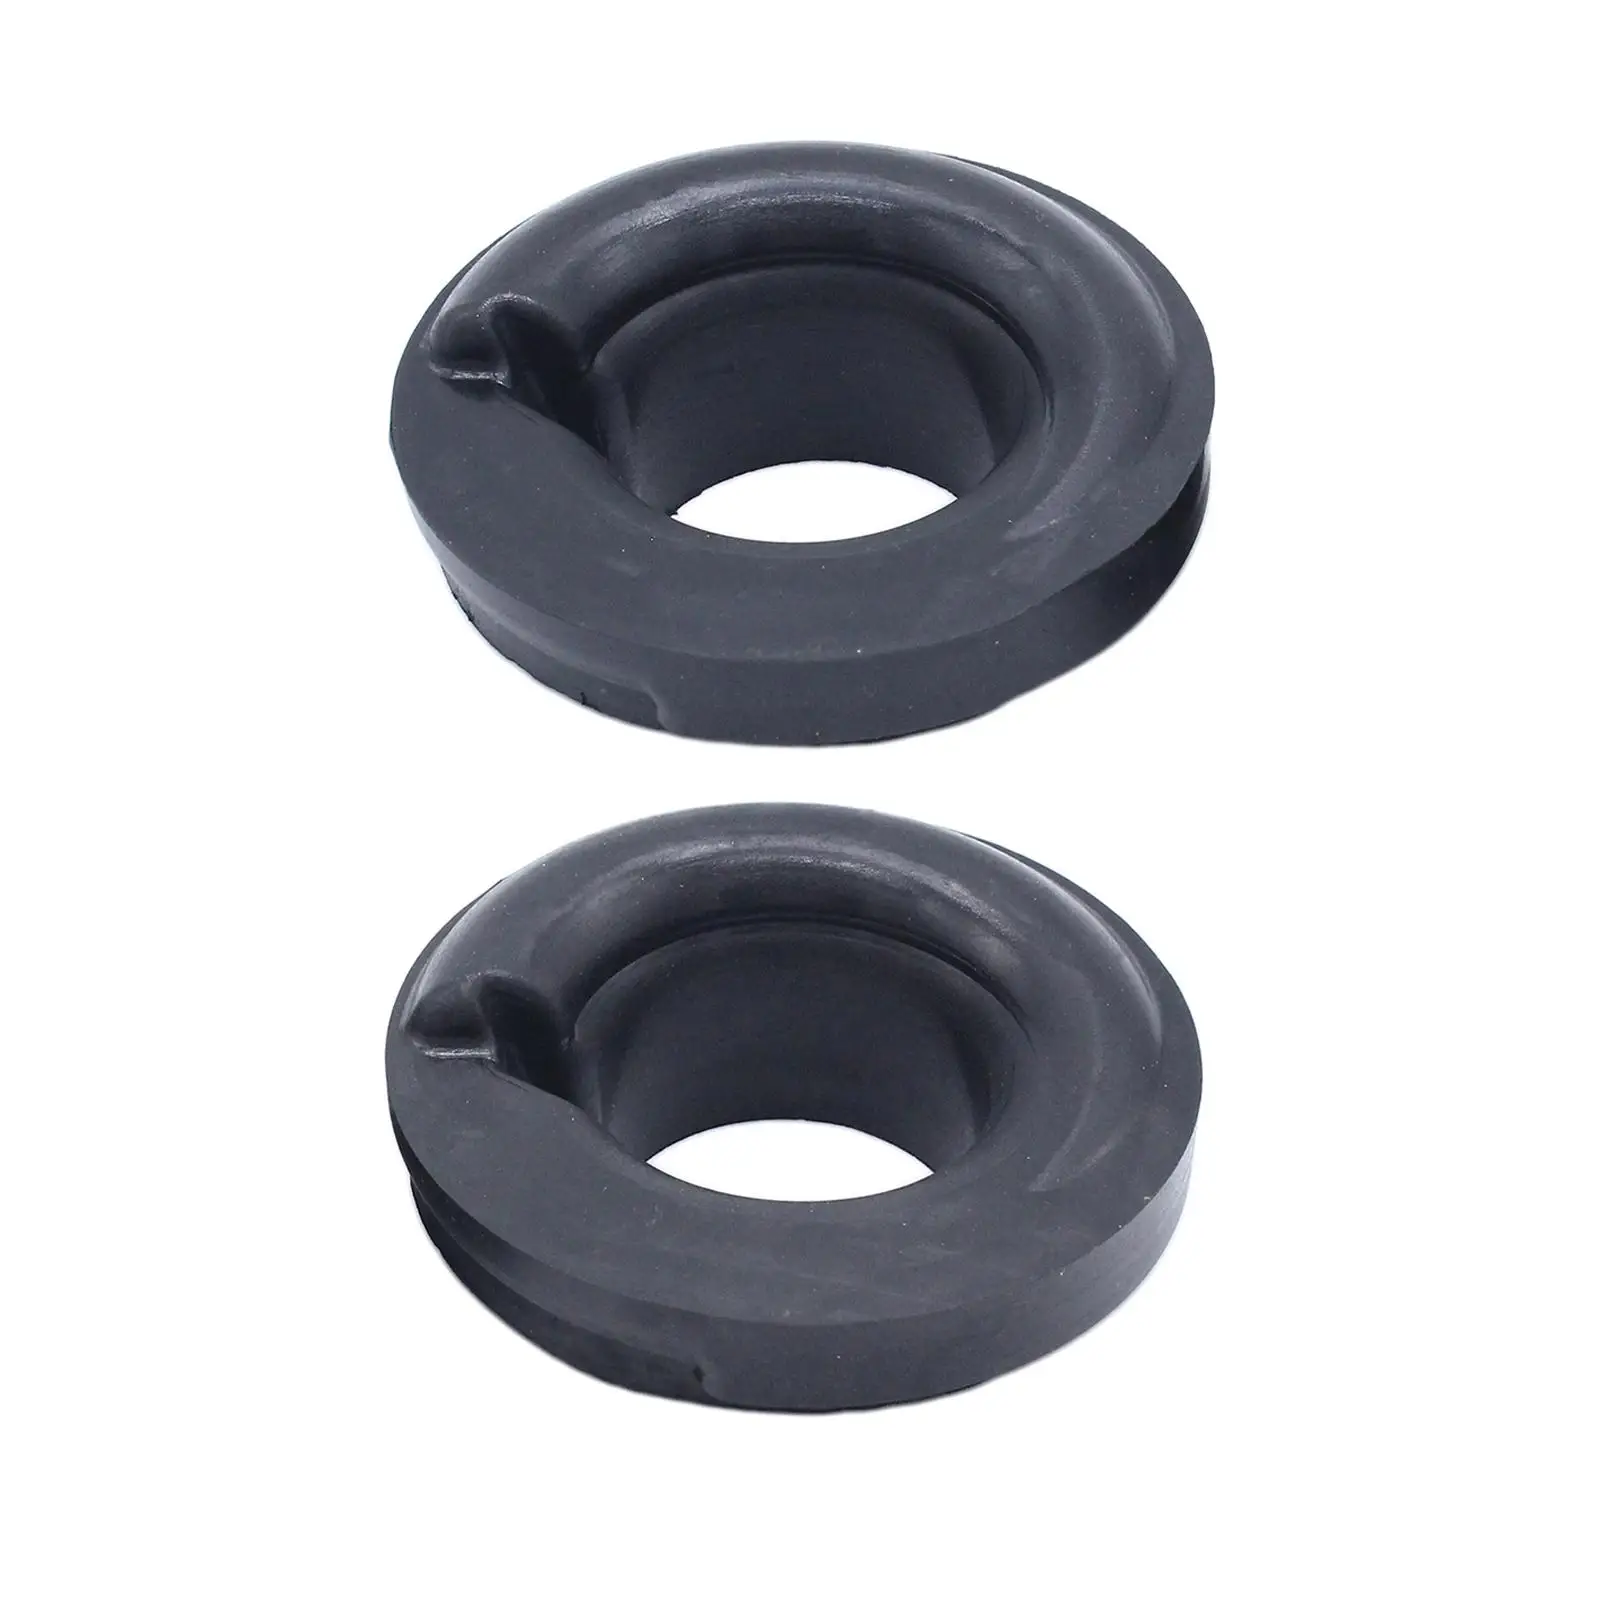 2x Car Rear Lower Rubber Spring Seat Cup Mount for VW Transporter T5   2003-2015 for Caravelle Cups Support Rubber Mounts